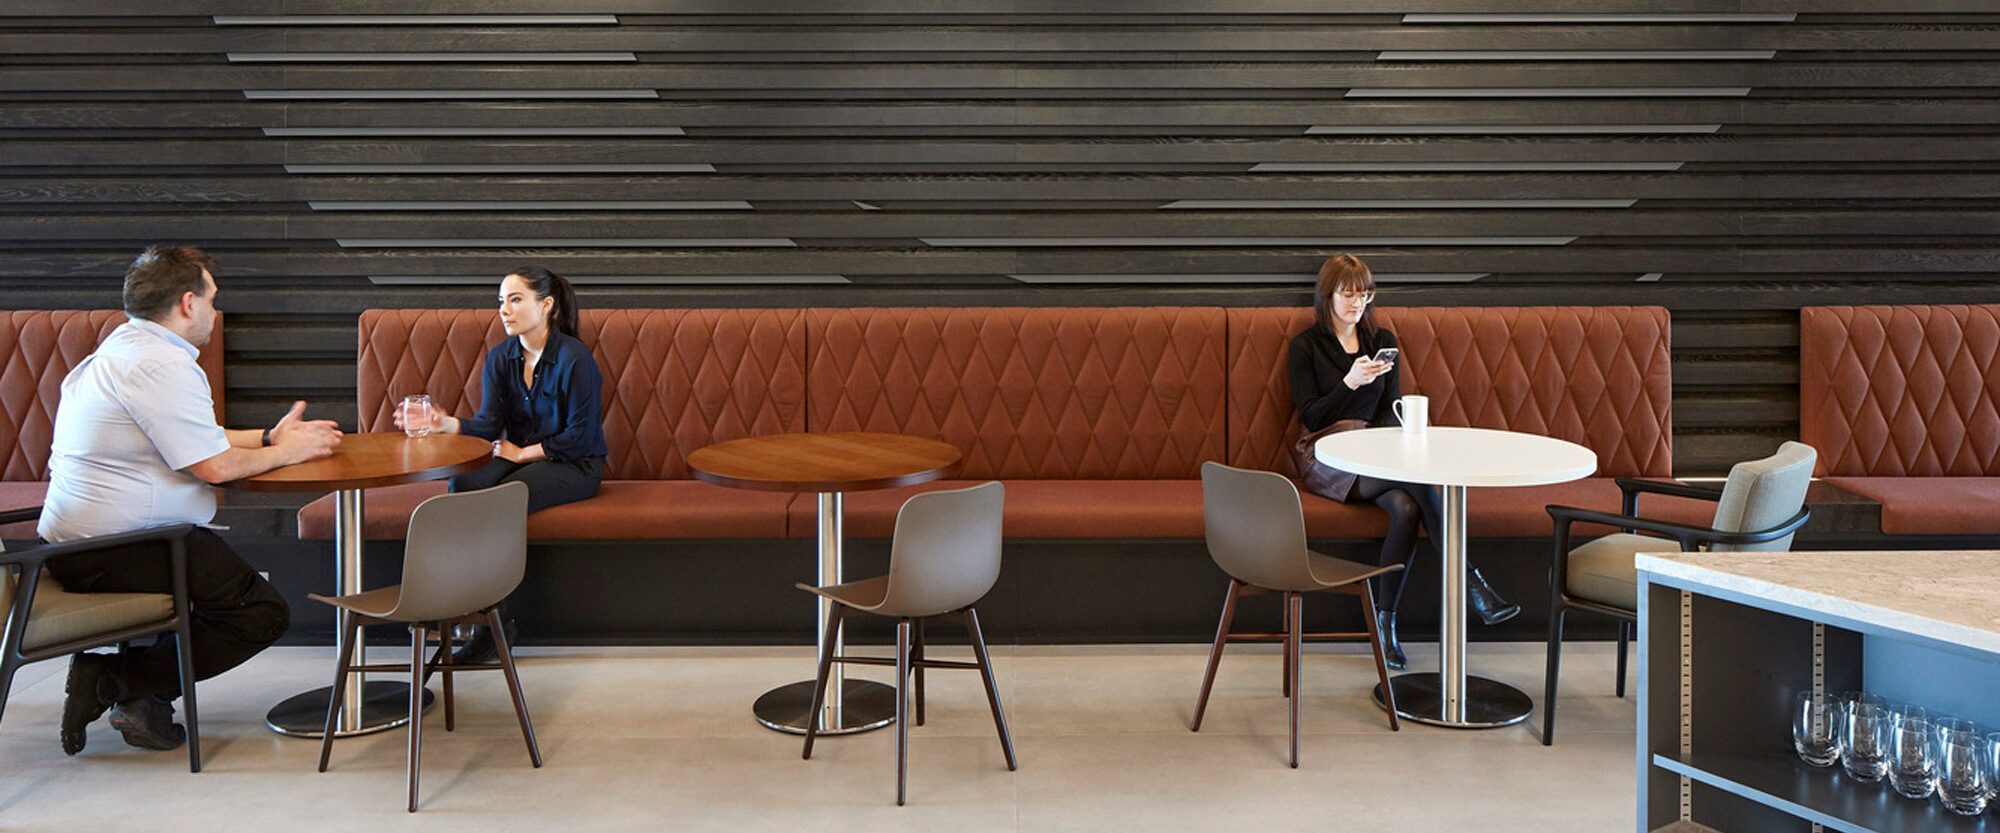 Modern café interior featuring terracotta-hued upholstered booths, circular wooden tables, and minimalist chairs. A striking black textured accent wall contrasts with the warm tones, complemented by sleek horizontal lighting elements and an acoustical tile ceiling for a contemporary ambiance.